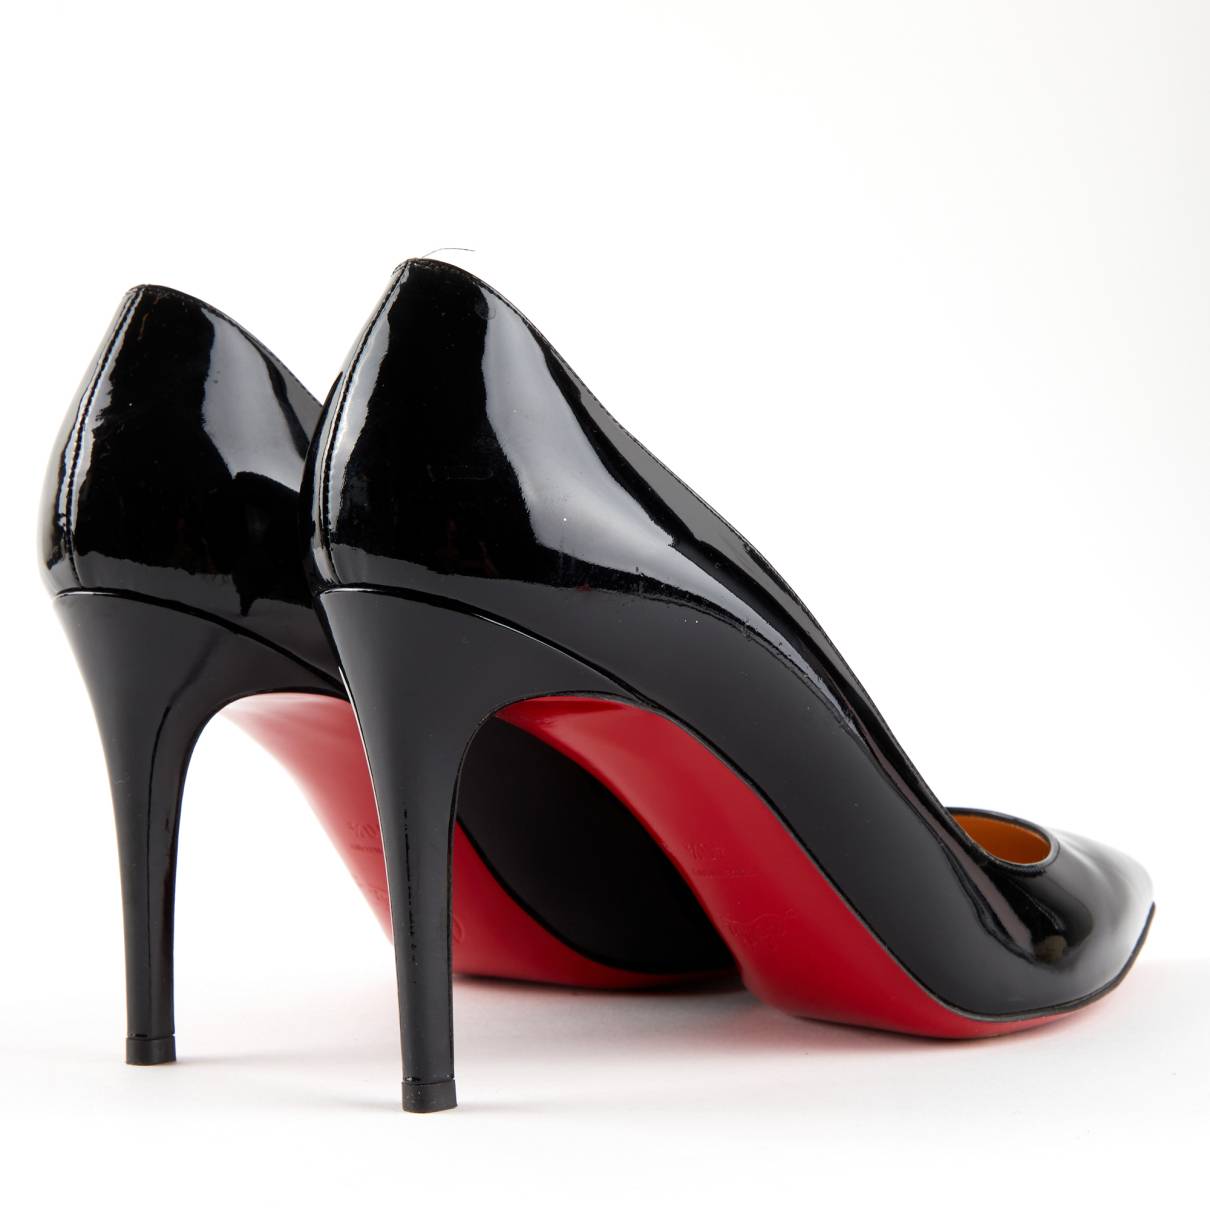 Pigalle patent leather heels Christian Louboutin Black size 40.5